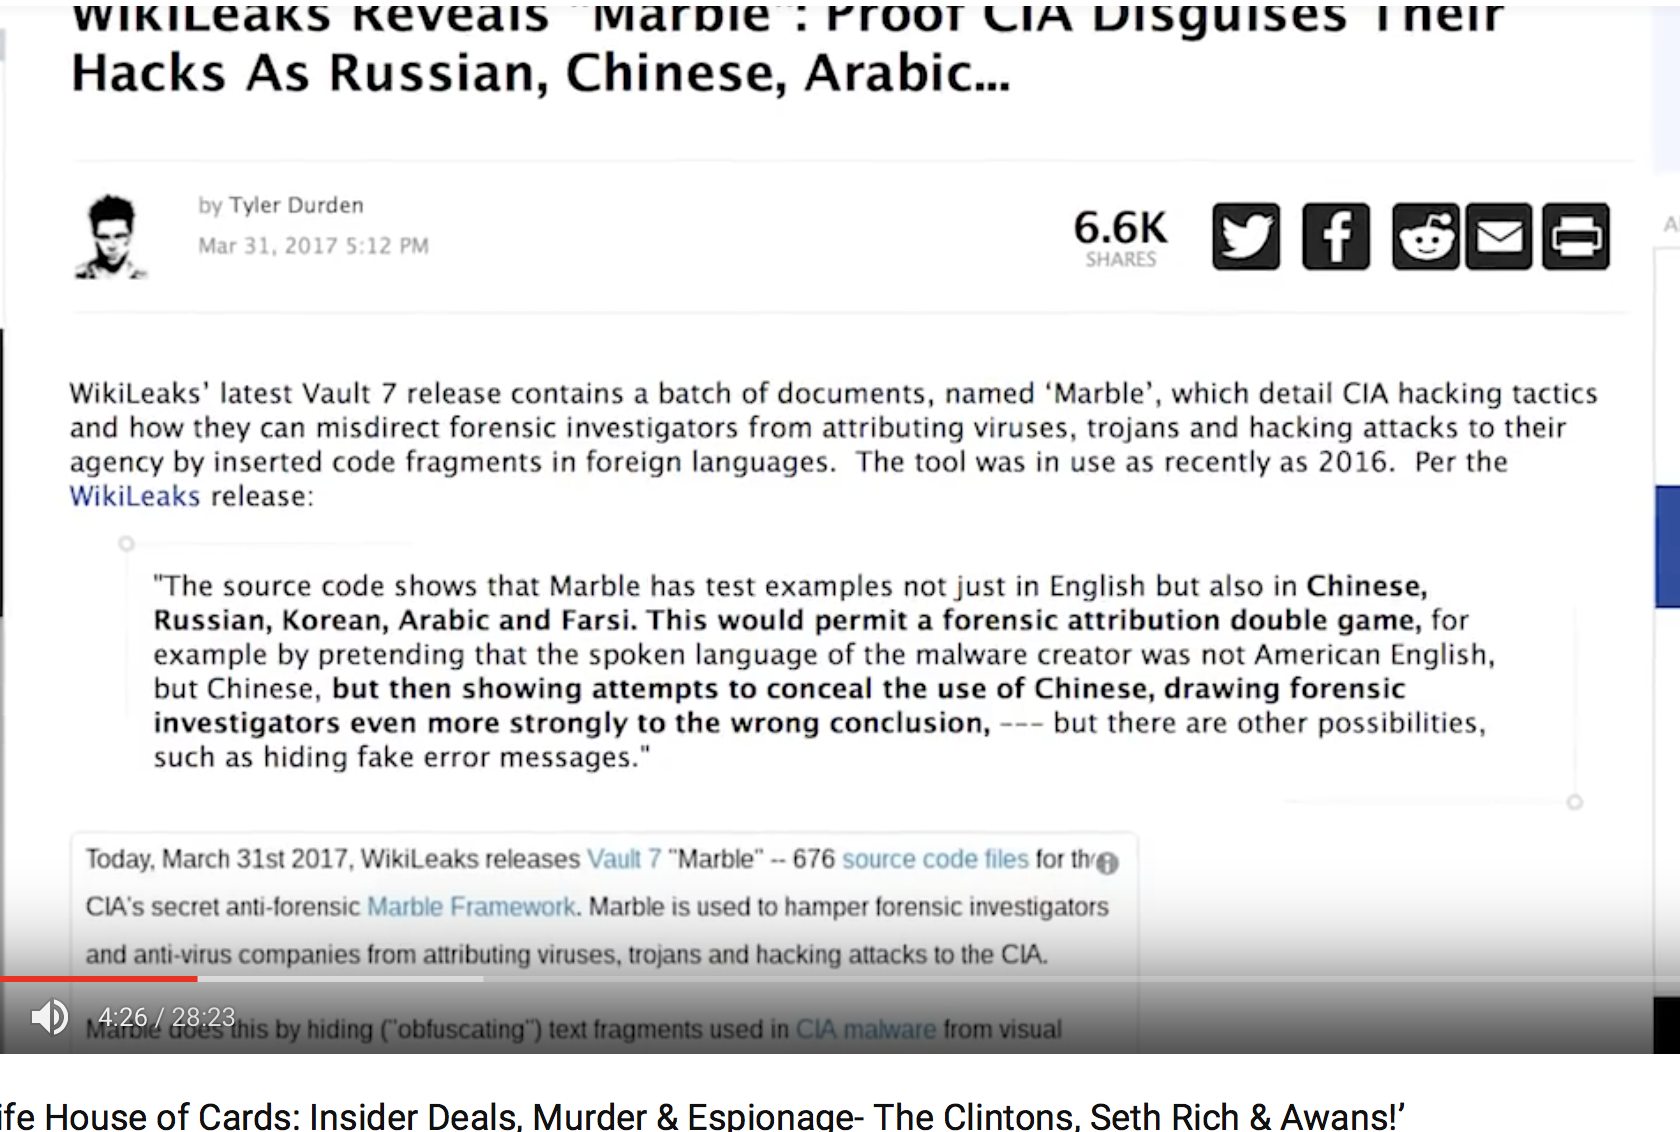 Marble CIA disguises their hacks as Russian, chinese,